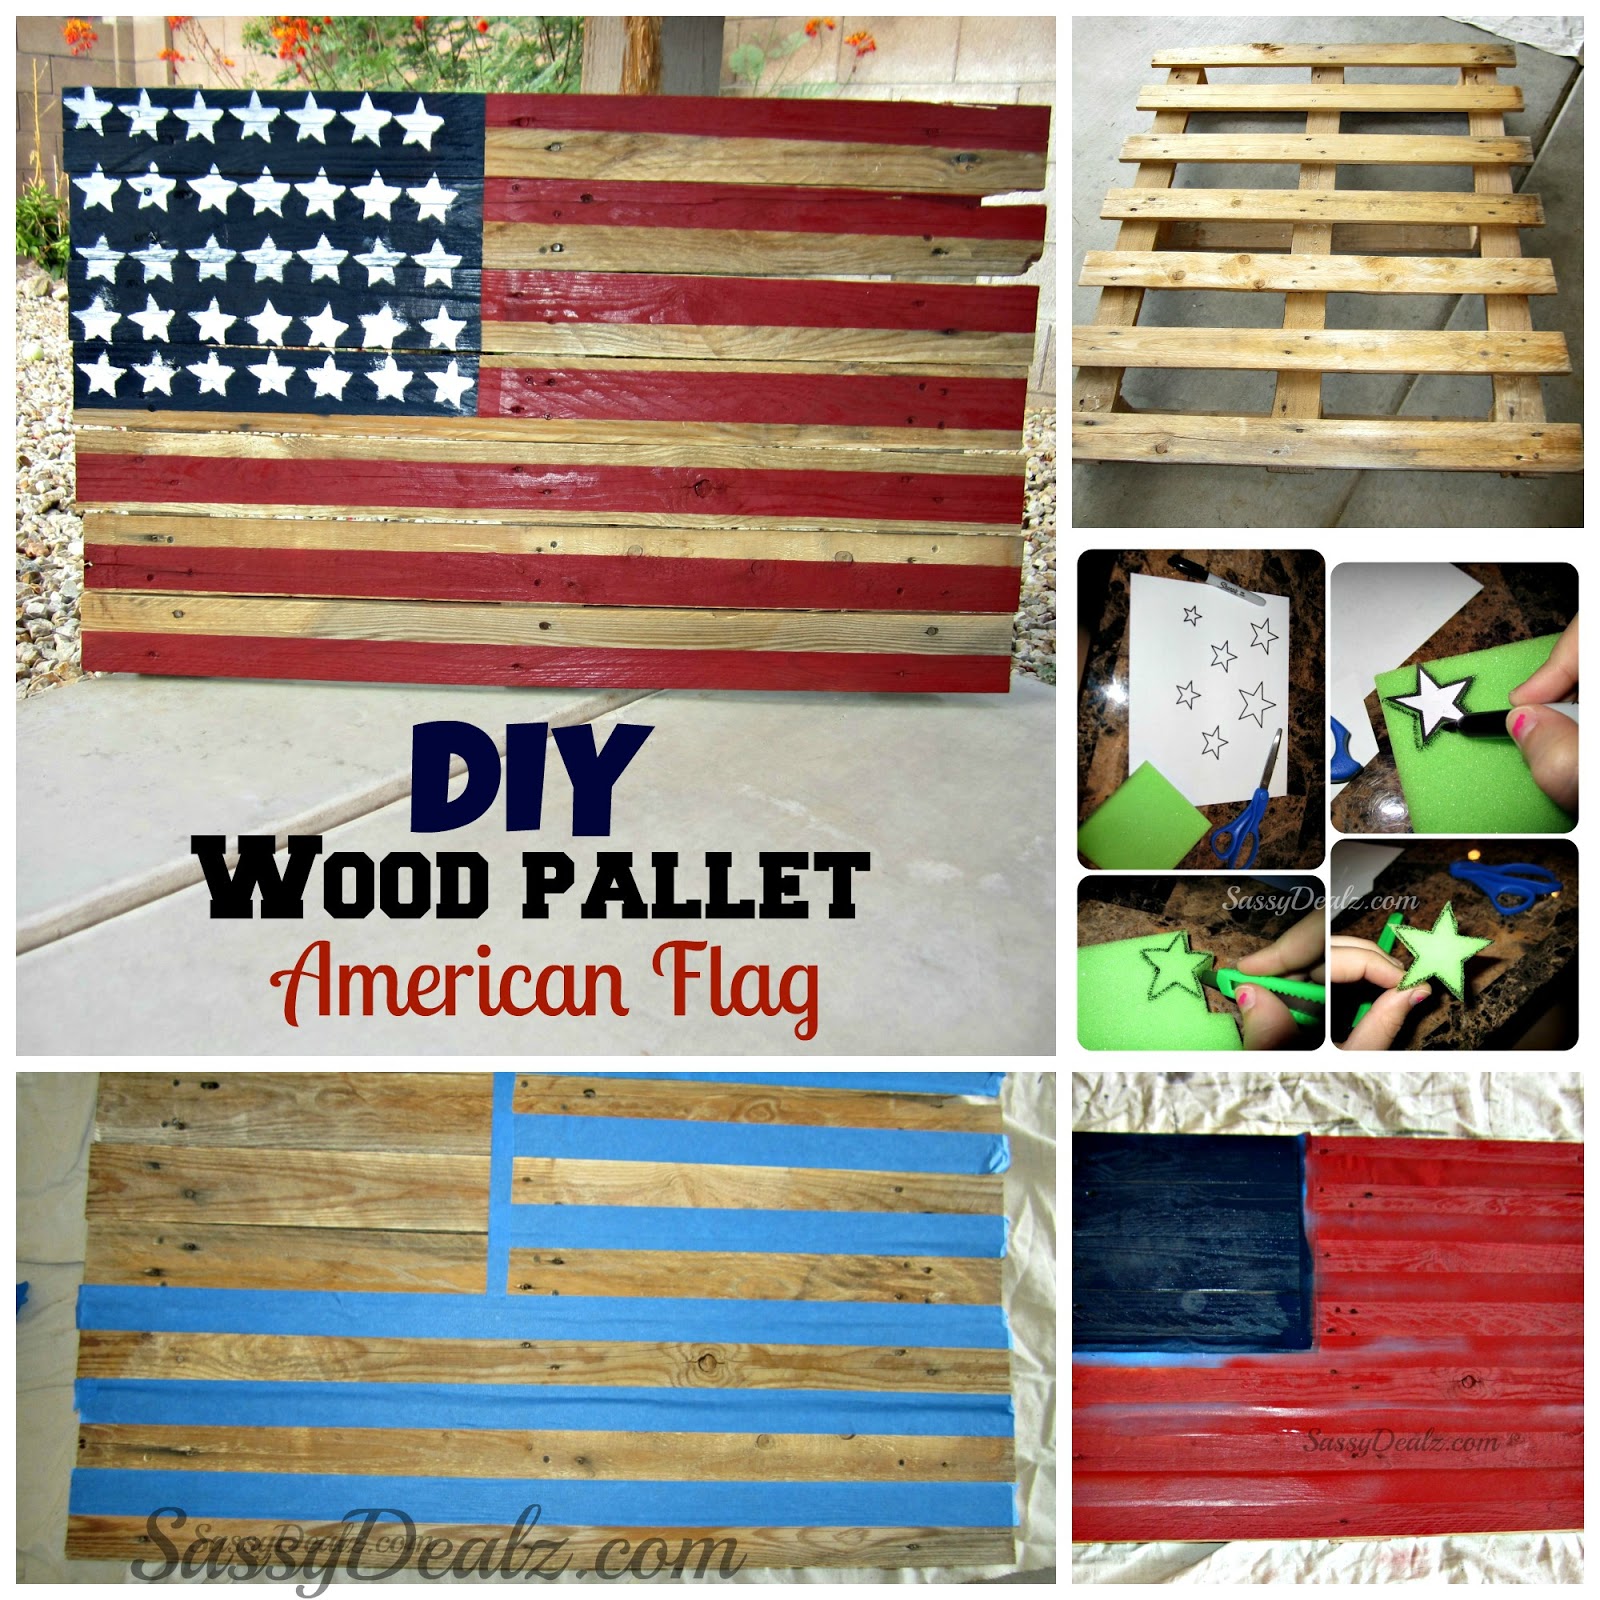 DIY: How To Make an American Flag out of a Wood Pallet ...